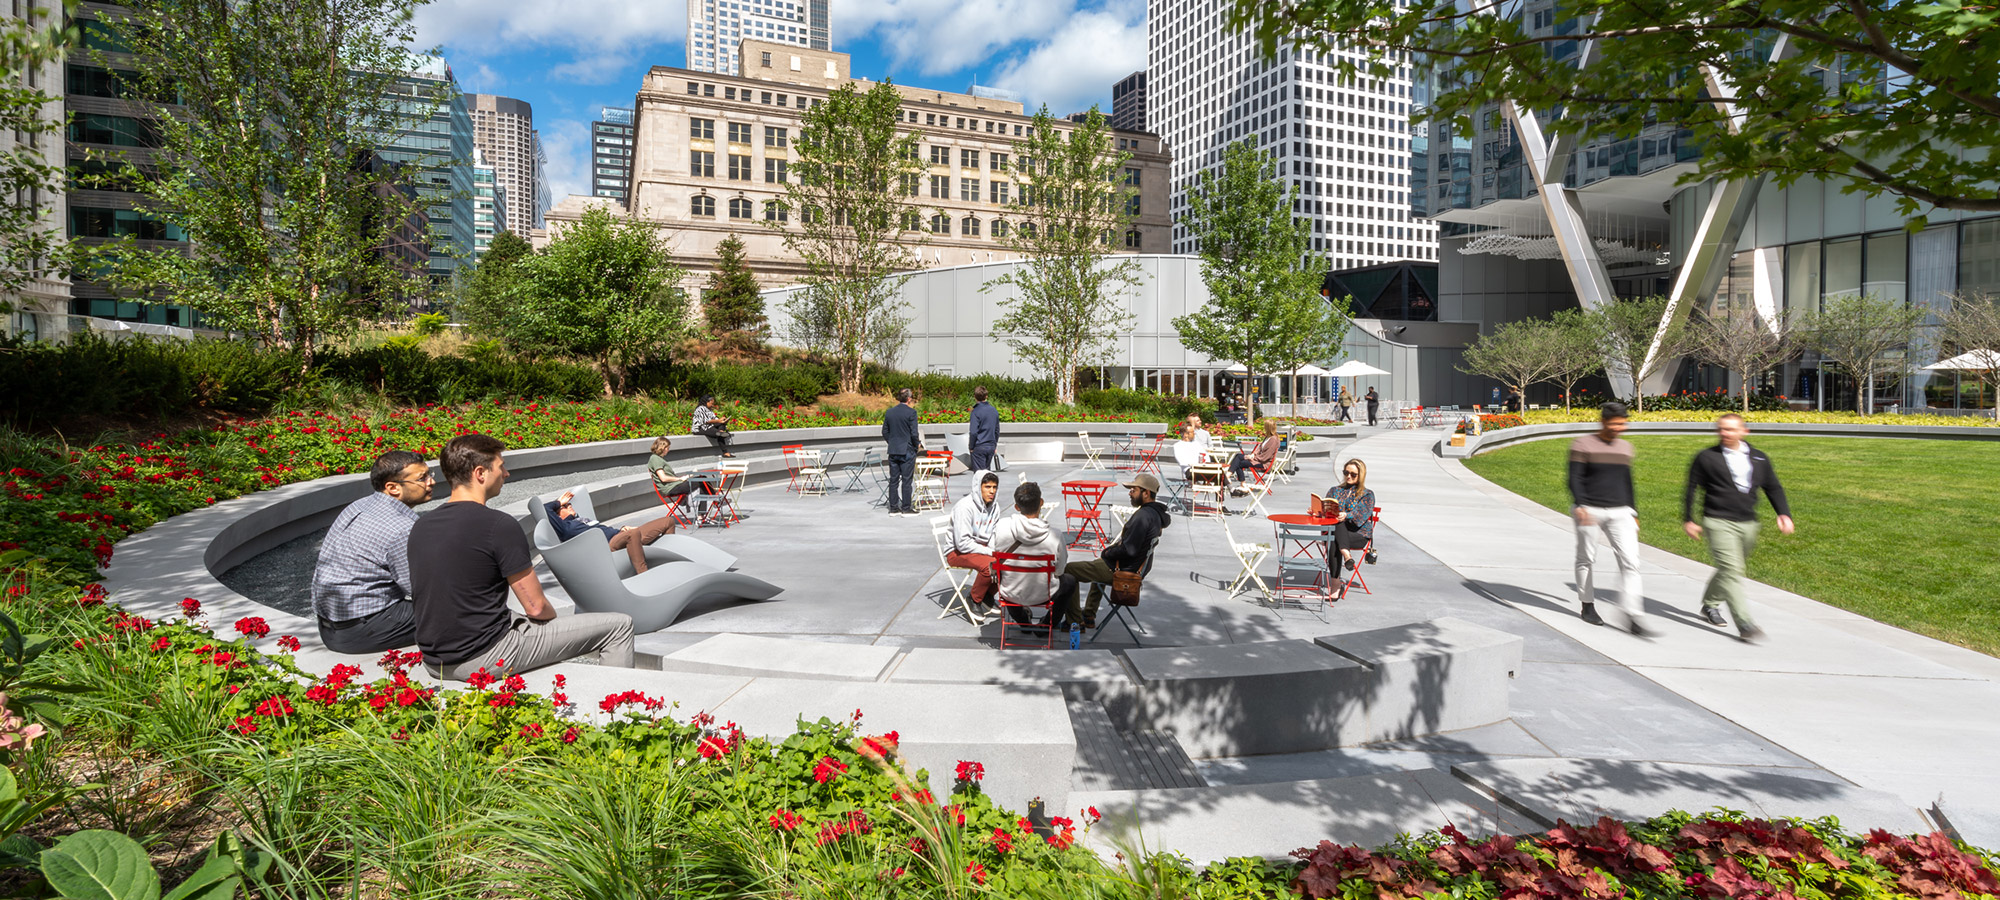 3d rendering of people enjoying a park with bistro-style seating